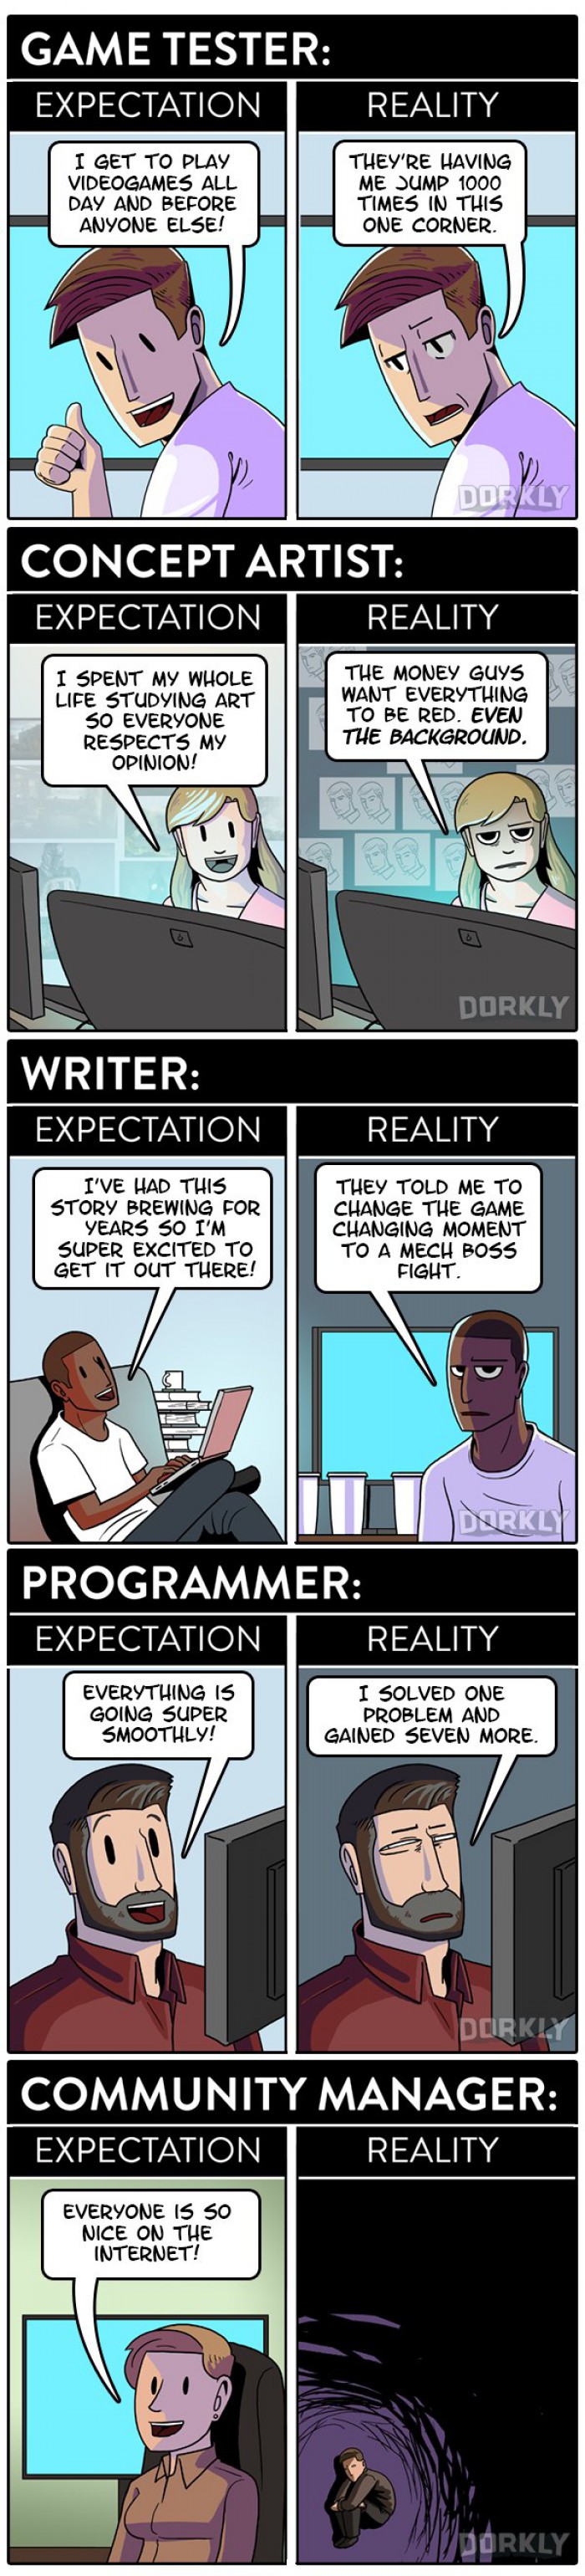 as a programmer i can relate to this